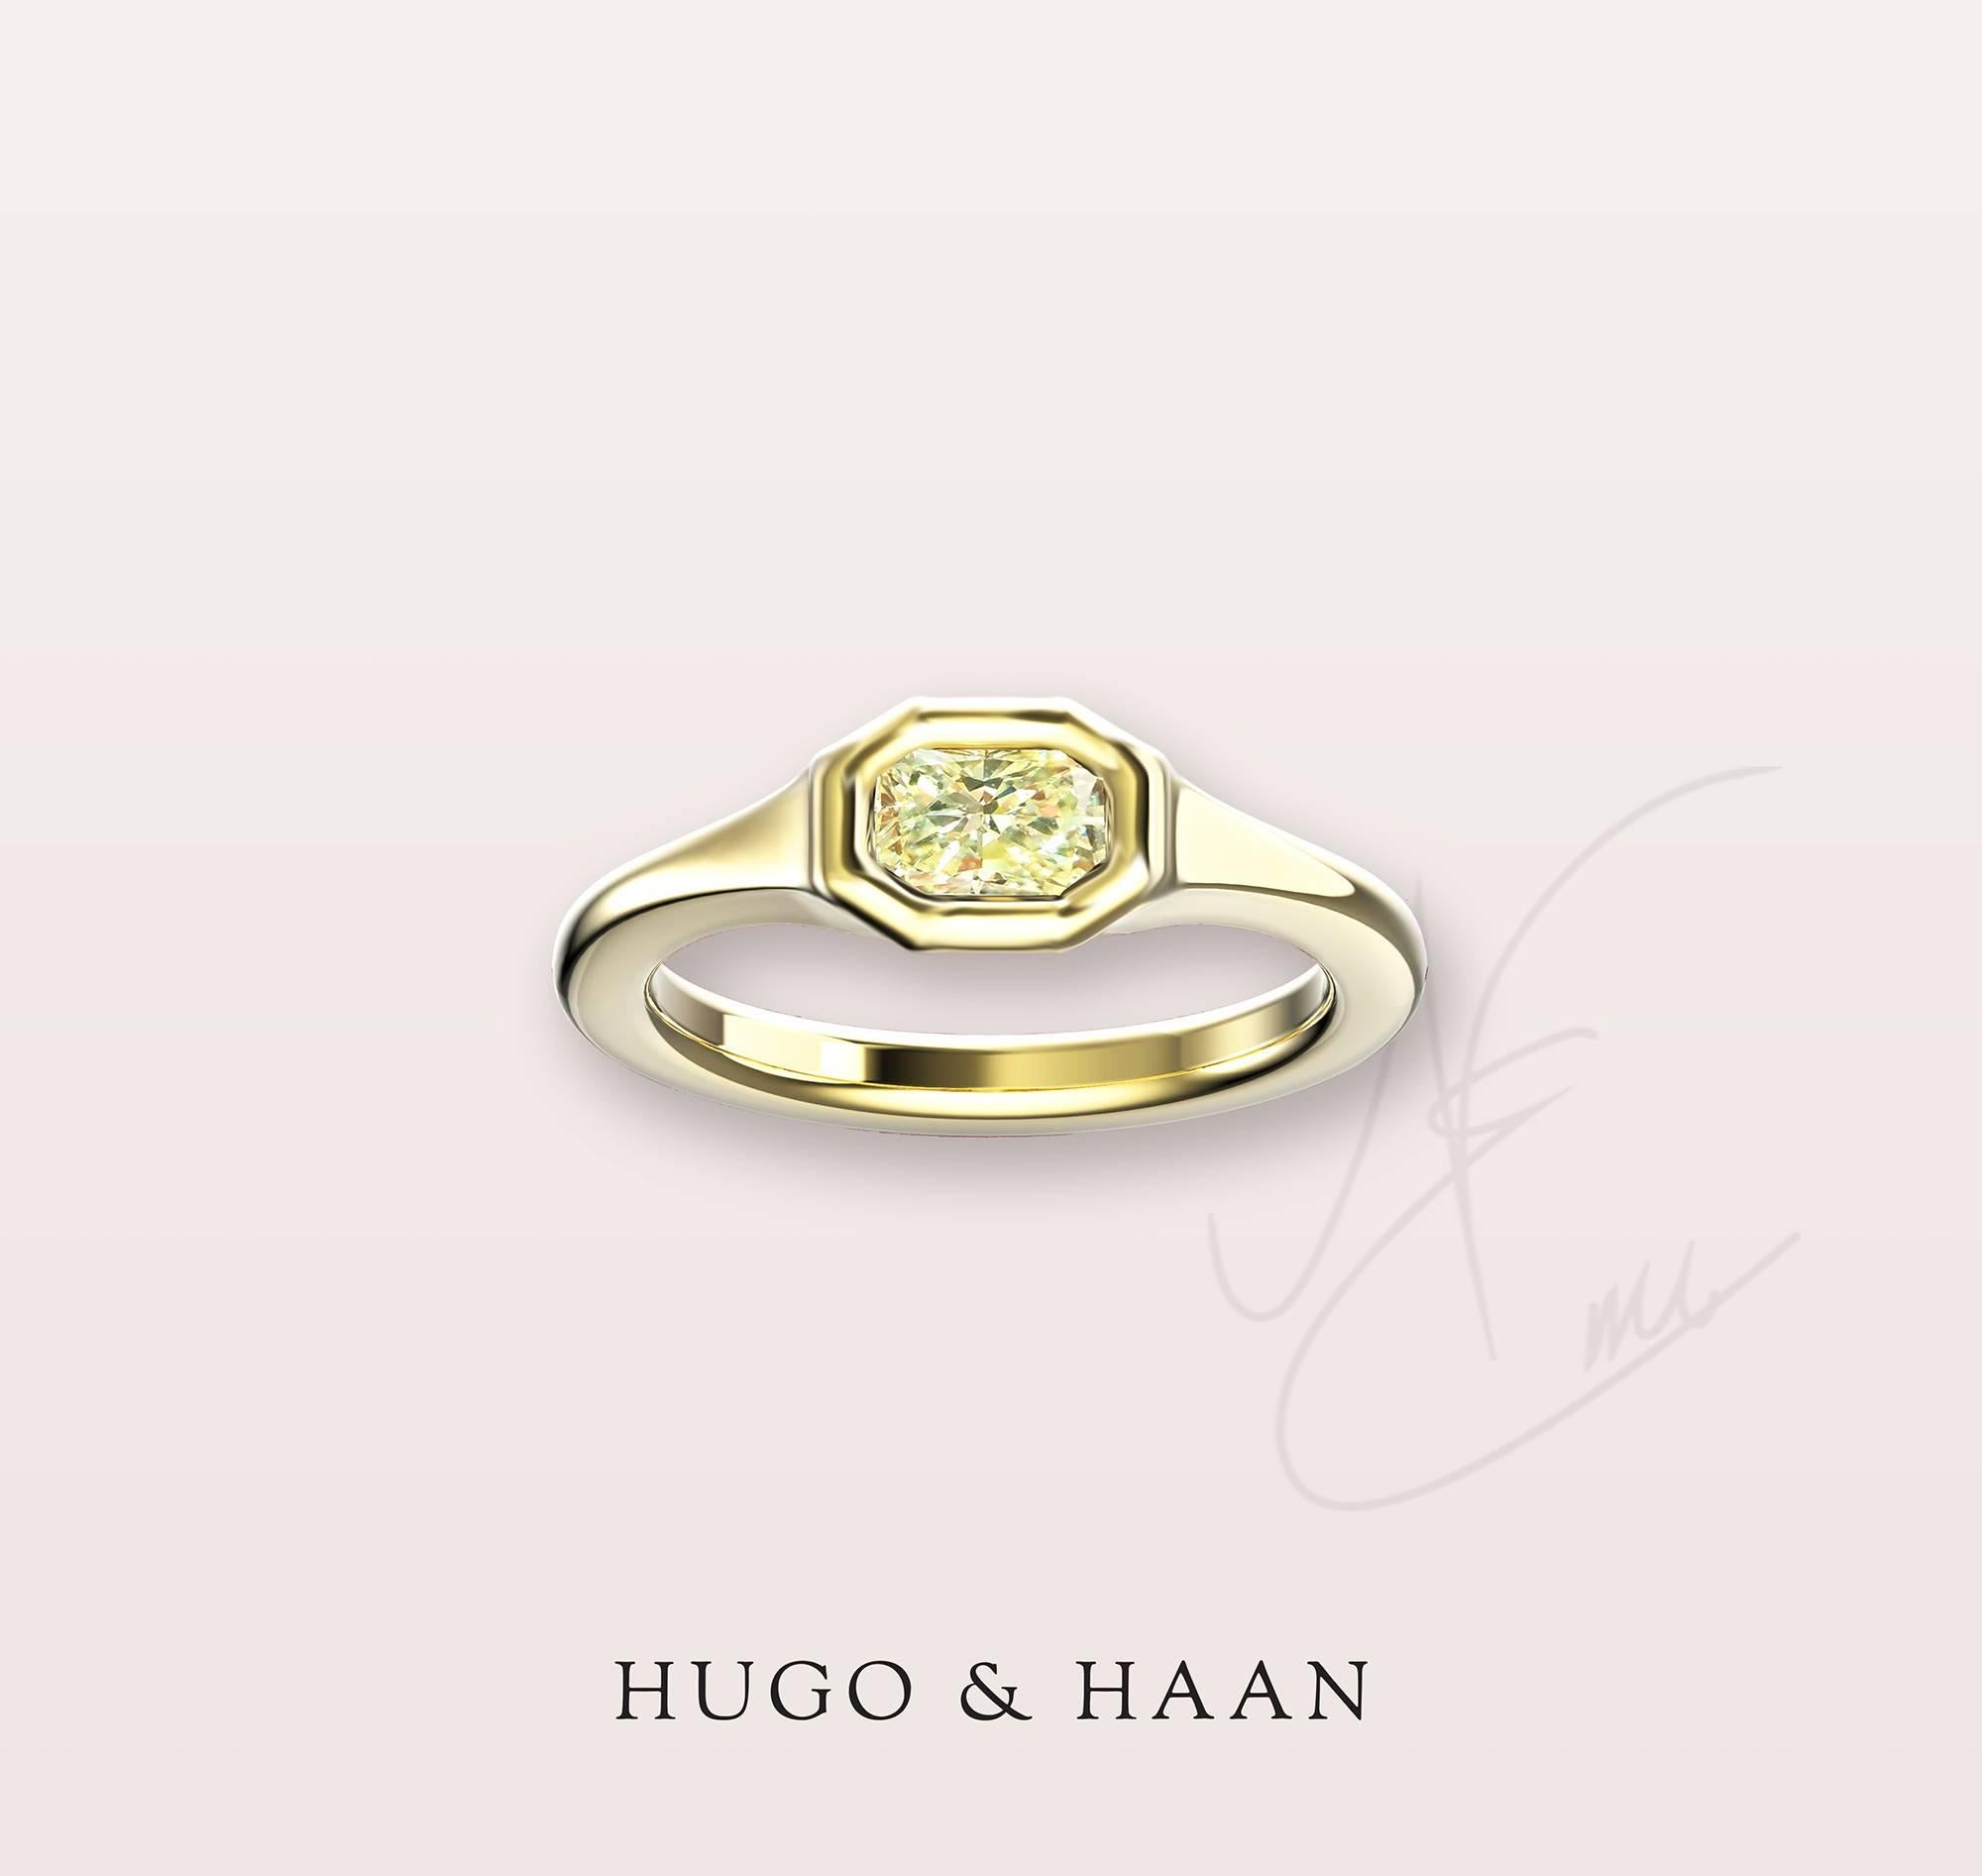 Details:

Material : 18k Yellow Gold
Principle Gemstone : GIA Certified 0.35ct Radiant Cut Fancy Light Yellow Diamond (SI2 clarity)
Customizable: Yes

Options to customize: 

Metals available : Platinum /18kt Yellow Gold / 18kt White Gold / 18kt